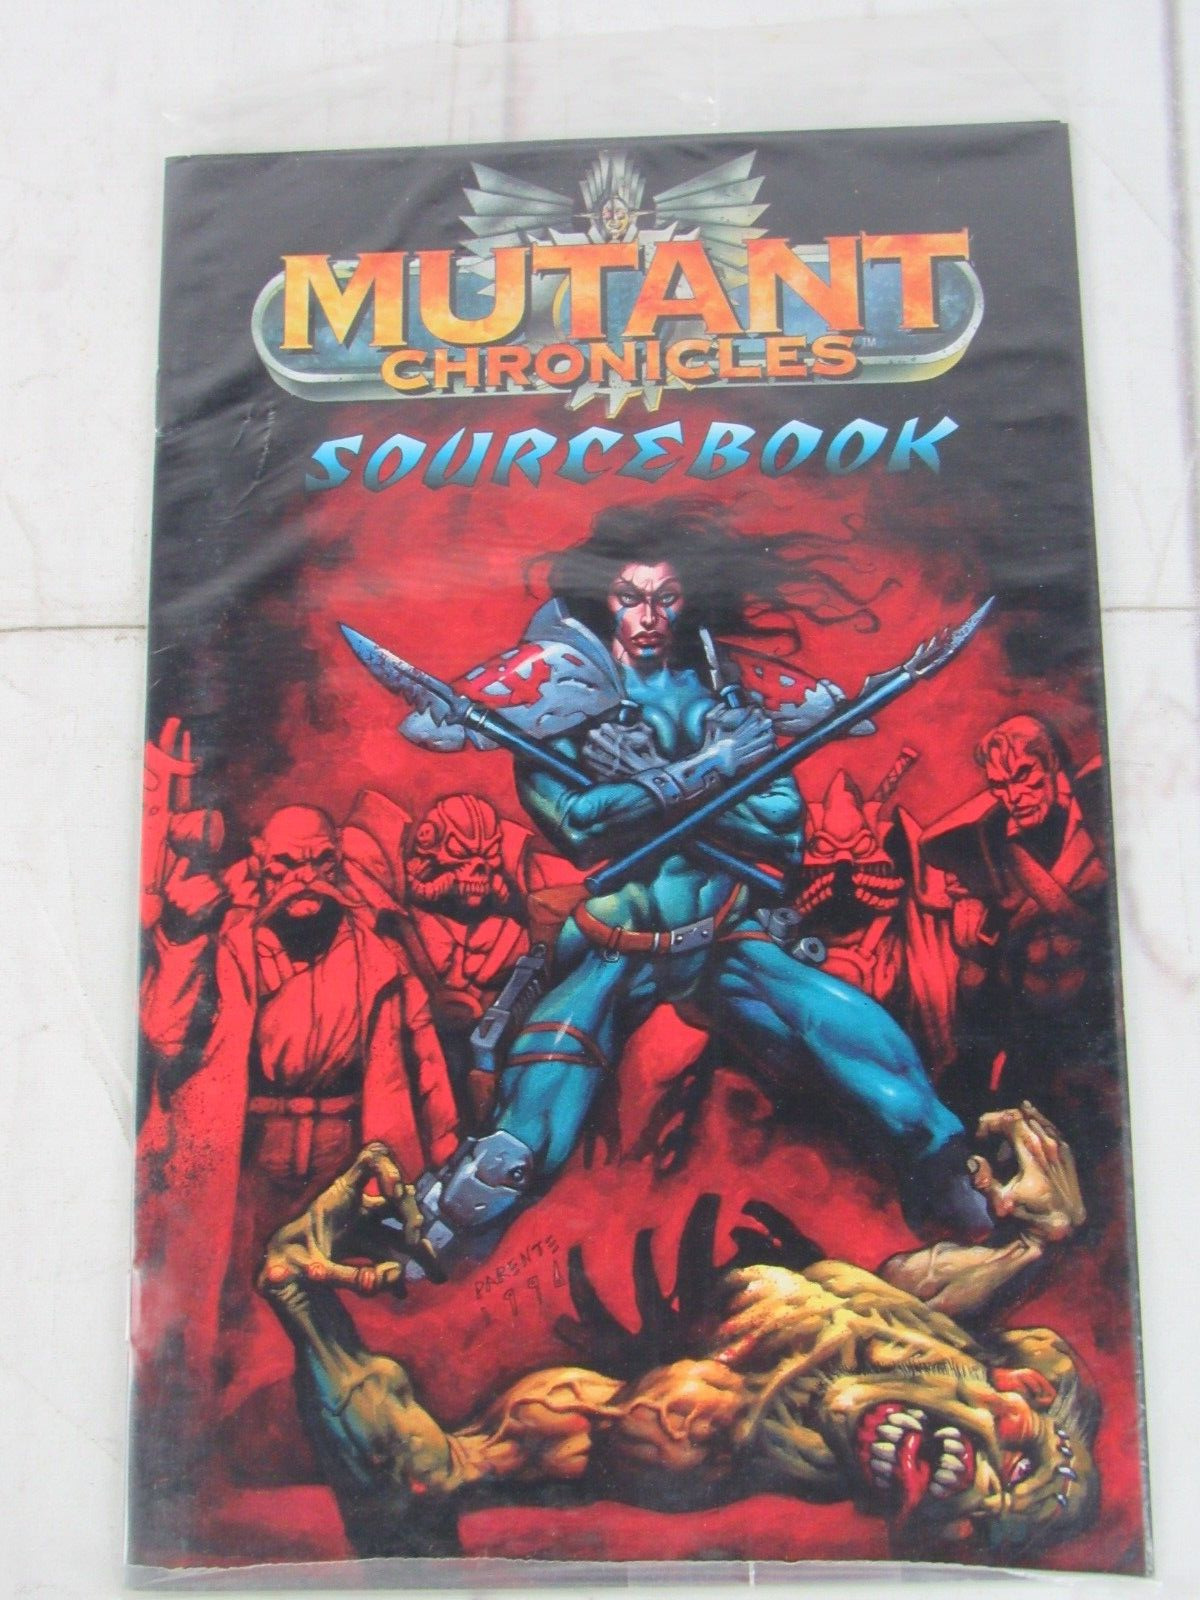 Mutant Chronicles Sourcebook #1 Sept. 1996 Acclaim Comics Wolfe in the Heat